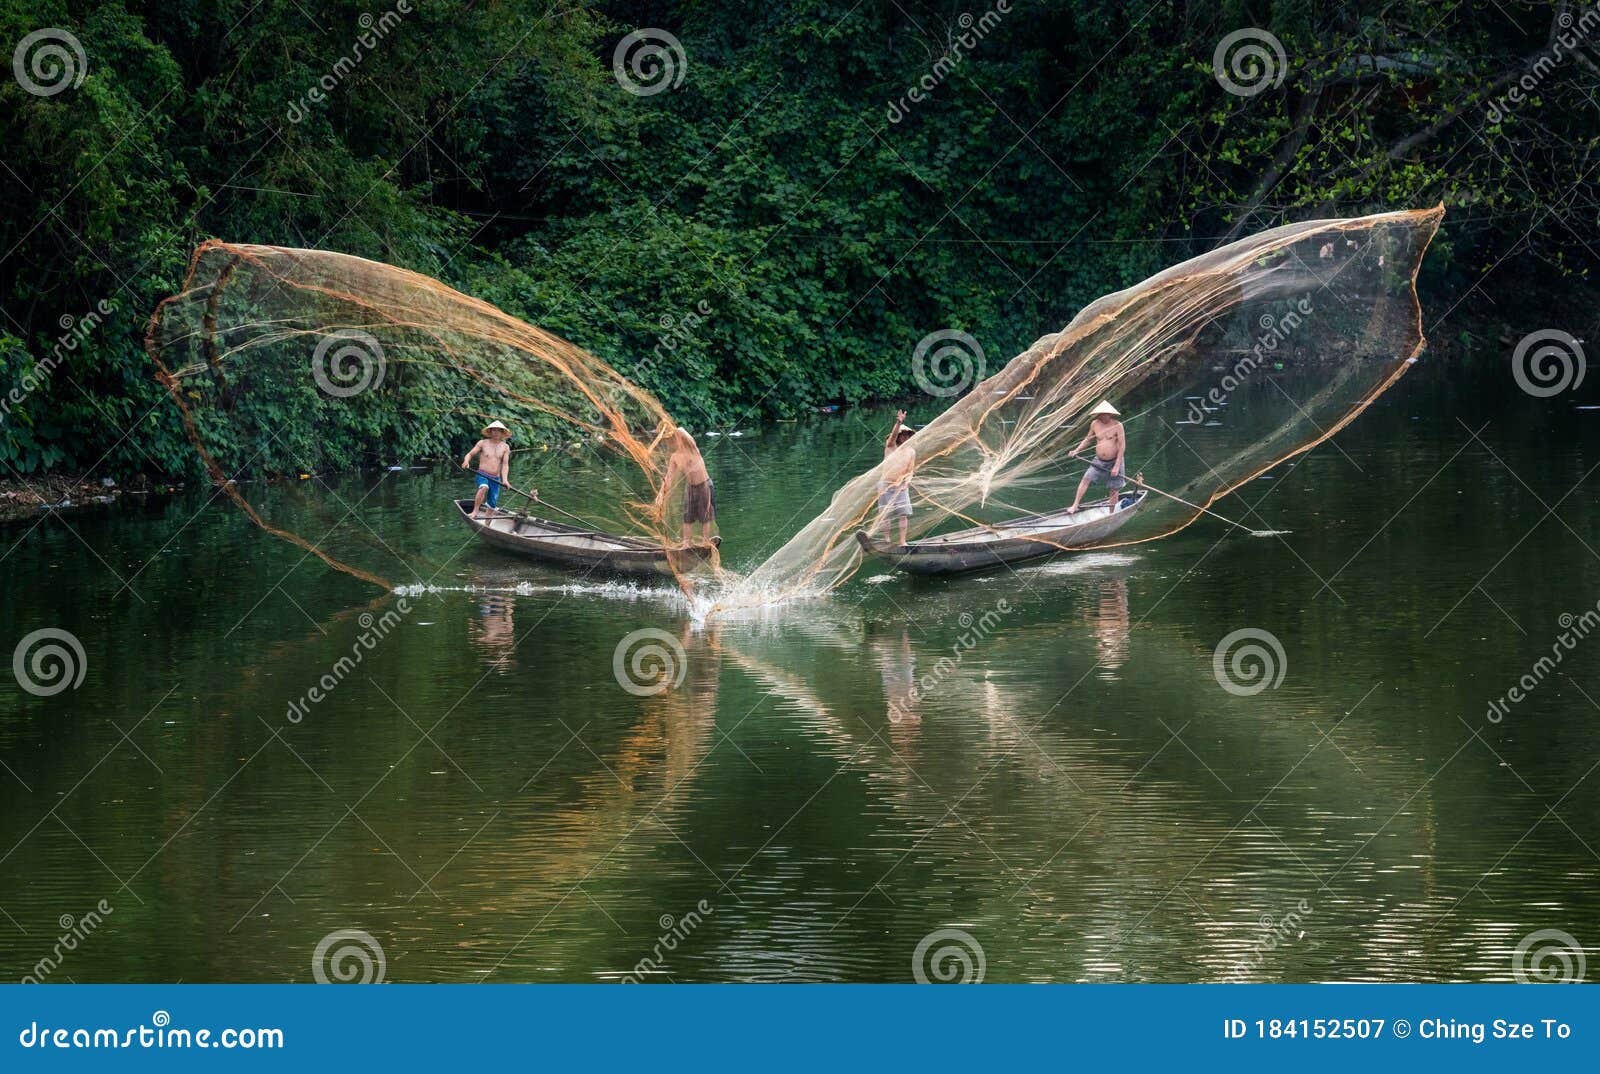 An Aerial Shot of Four Vietnamese Fisherman Throwing Fishnets from Two Boats  on the Song Nhu Y River Editorial Photography - Image of asian, floating:  184152507